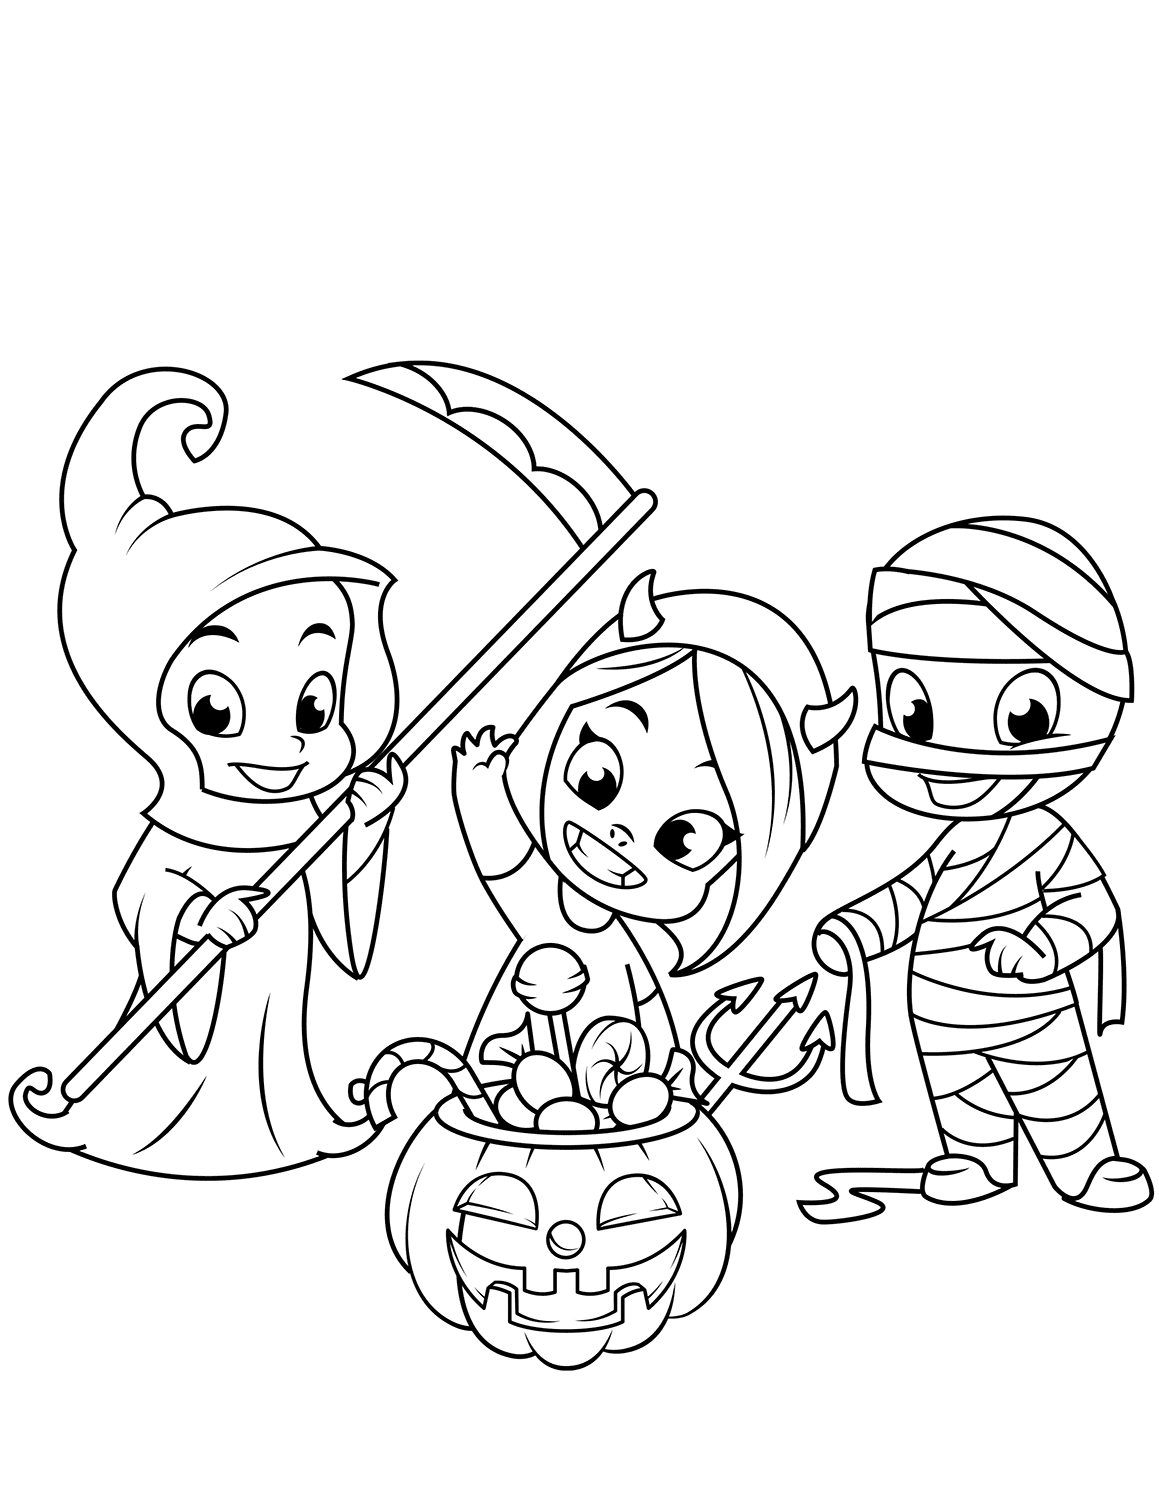 Cute Little Grim Reaper Devil Mummy And A Jack O Lantern With Candies Halloween Coloring Page